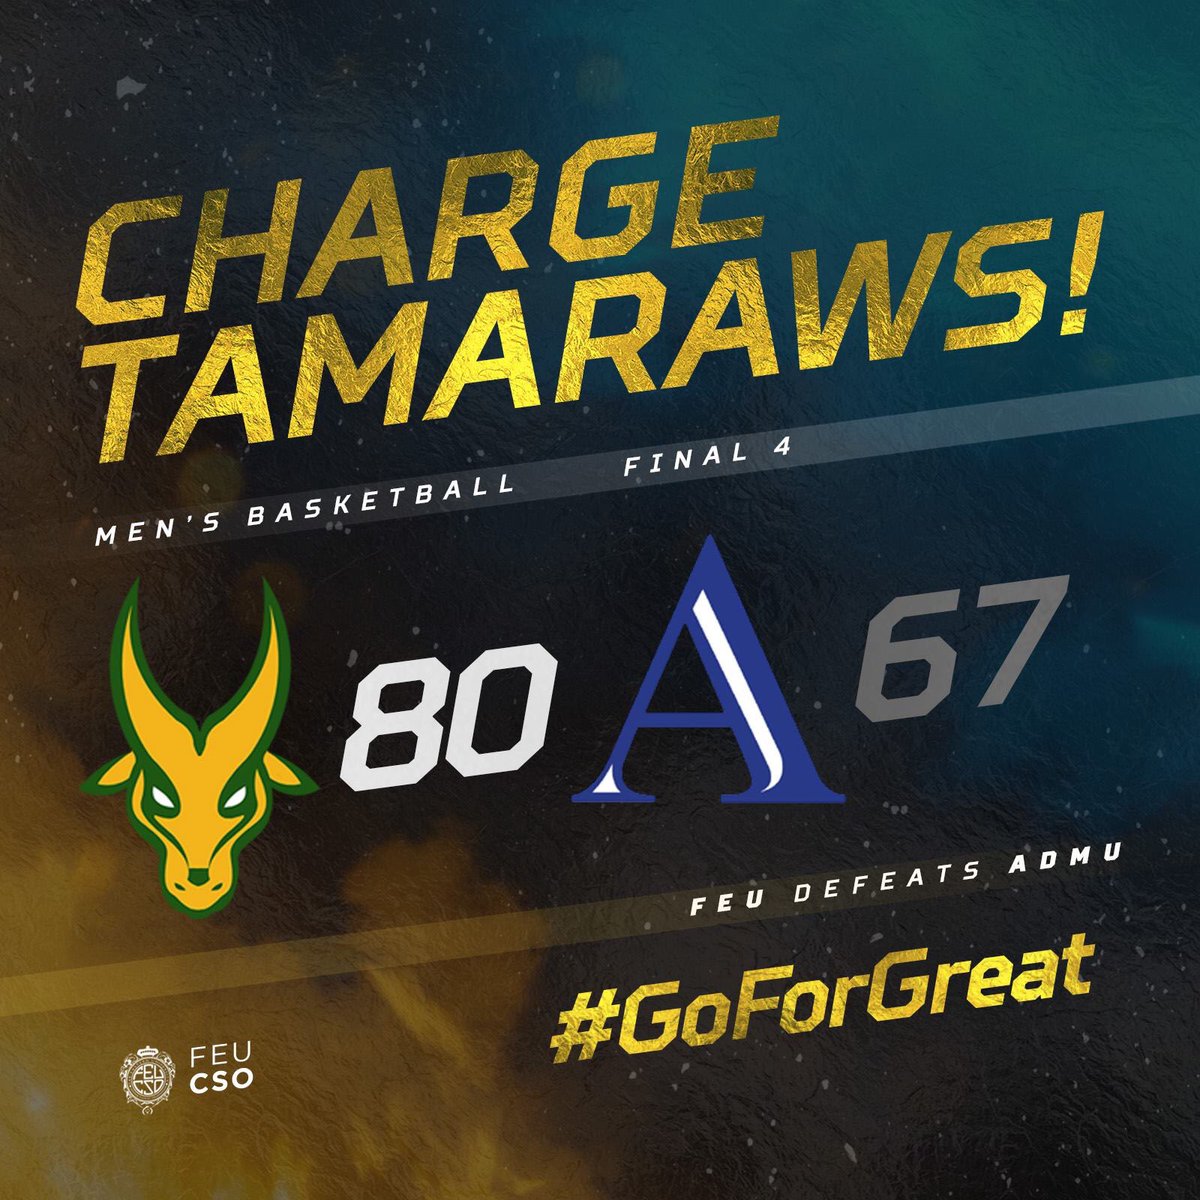 Charge Tamaraws! FEU forces a do-or-die game with Ateneo on Wednesday, 22 November, 4PM at the Mall of Asia Arena!

#FierceTamaraws #GoForGreat